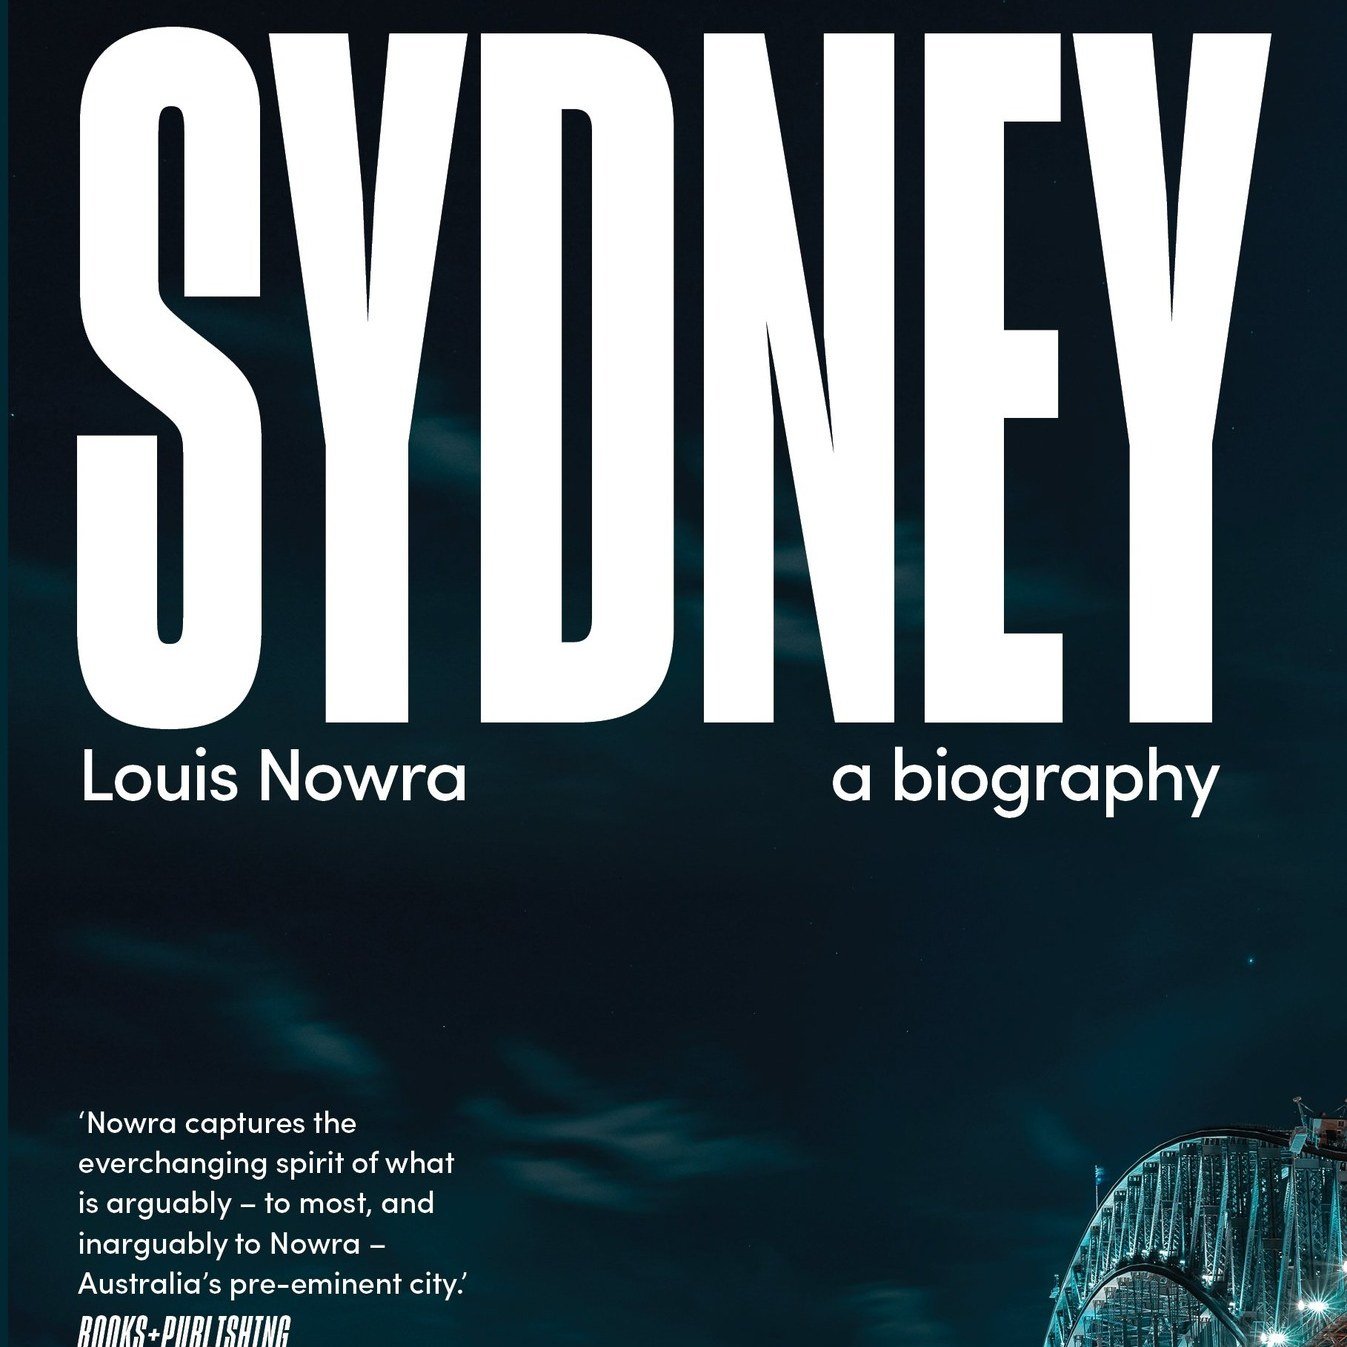 We had such a great reaction to our book recommendations a few weeks ago, we thought we should do it again!

This one is our latest favourites from one of our city's most cherished authors: Louis Nowra. His depiction of Sydney captures the city's mul